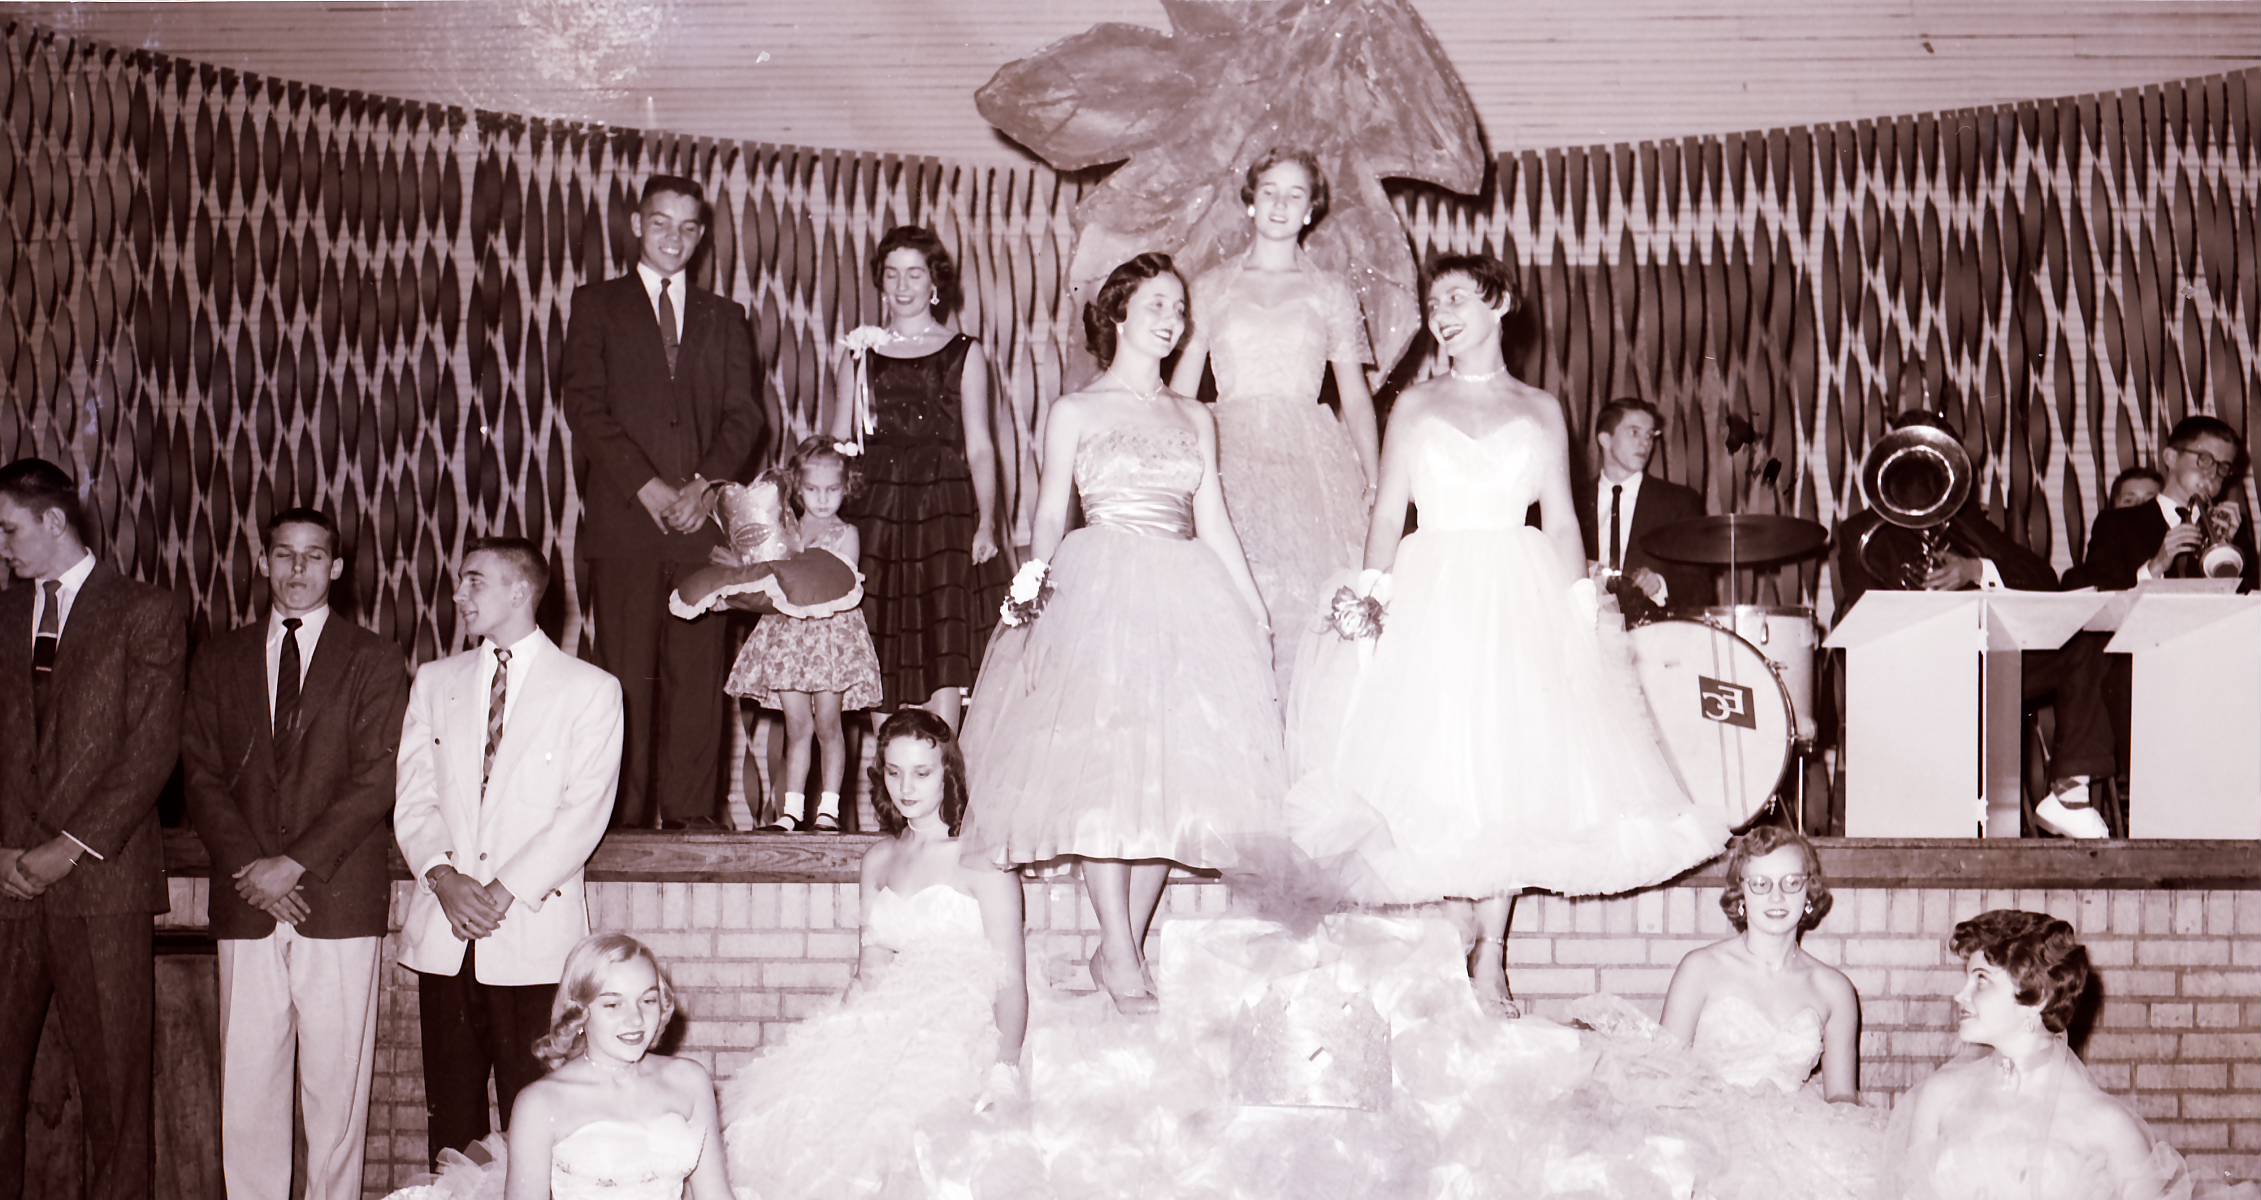 ON STAGE: JOHN KOSKINEN, LITTLE GIRL - MARY DENISE WHITT, JUDY DIXON, QUEEN ROBERTA WILLIAMS, SR. ATTENDANTS MADGE MAUPIN AND PHYLLIS BOYD. ALSO SHOWN ARE DALE GRIFFITH, JON SHEPARD, RONNIE FOX, ATTENDANTS JOYCE FLETCHER, KATHY BARKER, JUDY FRANKLIN AND D